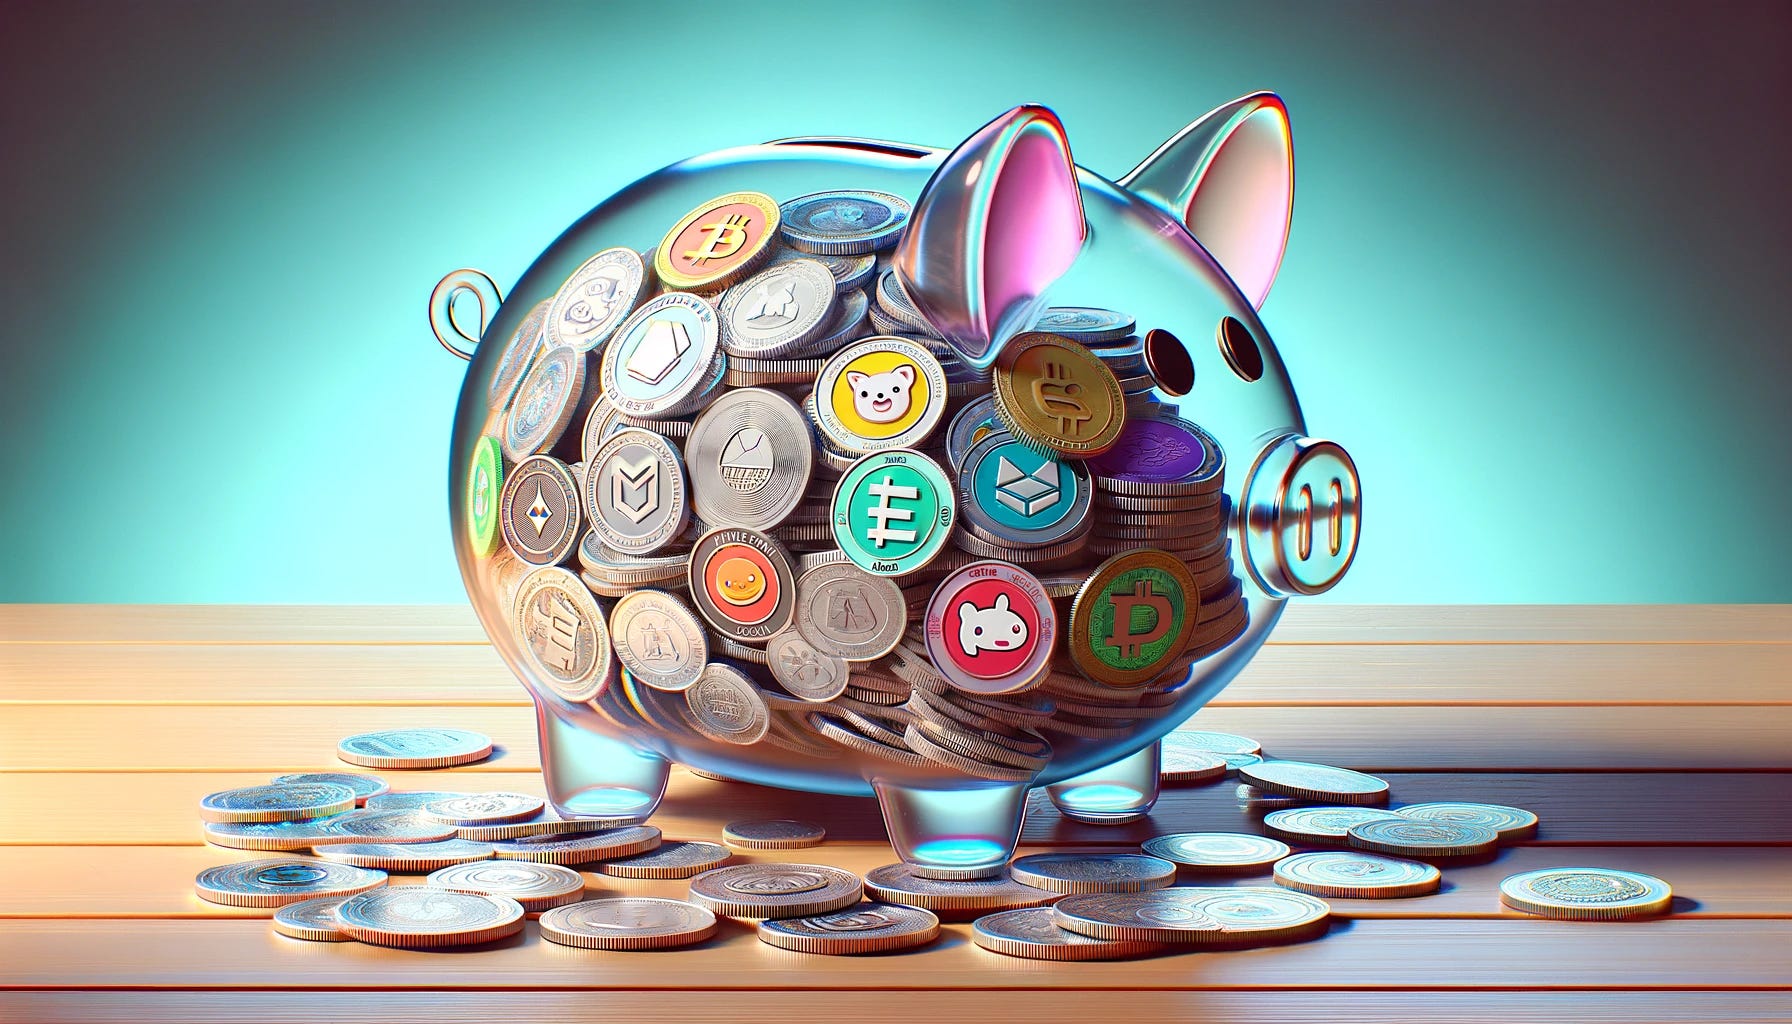 Create a landscape-oriented image depicting a transparent piggy bank filled with a variety of different memecoin tokens. The tokens should represent popular memecoins, each designed with distinctive logos and colors that make them easily recognizable. The piggy bank is made of clear, durable material, allowing a full view of the colorful and varied tokens inside. This image symbolizes the concept of investing in memecoins, showcasing the diversity and playful nature of these digital currencies. The background should be simple and unobtrusive, focusing the viewer's attention on the piggy bank and the tokens within. The overall composition should convey the idea of saving or collecting memecoins in a whimsical and visually appealing manner, blending the worlds of traditional saving with modern cryptocurrency investments.